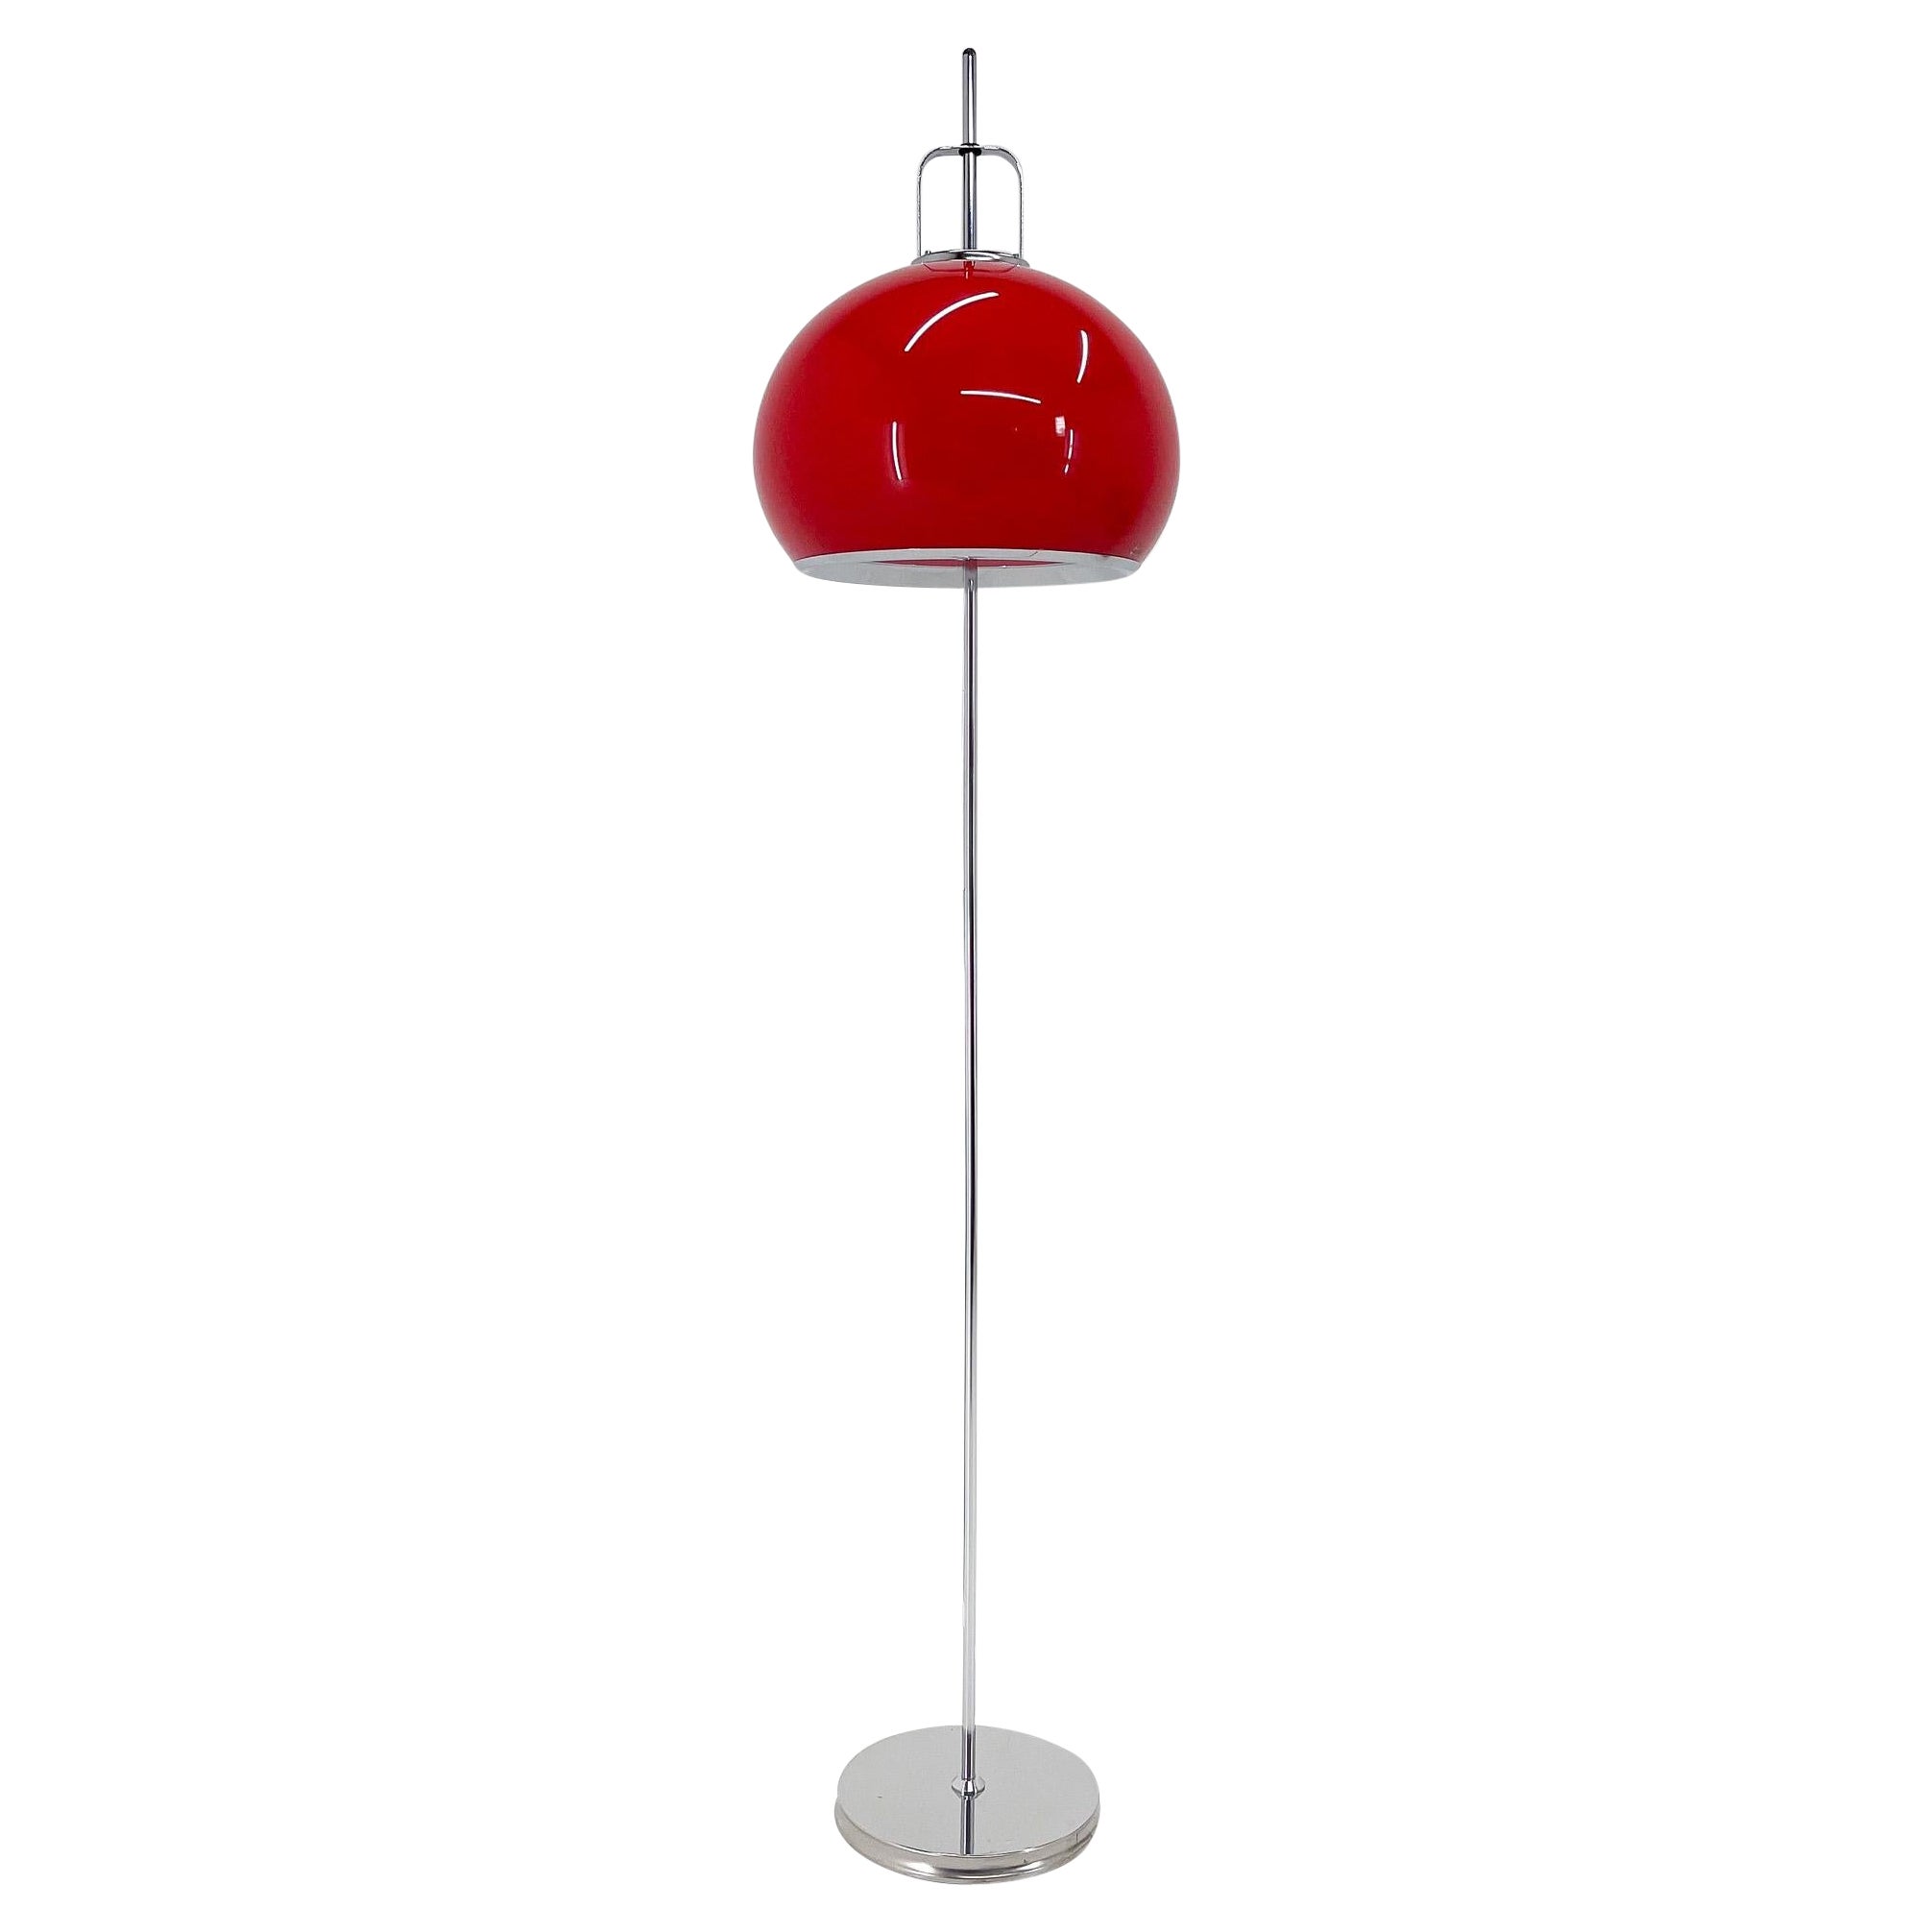 1970s Adjustable Floor Lamp Designed by Guzzini for Meblo, Italy  For Sale